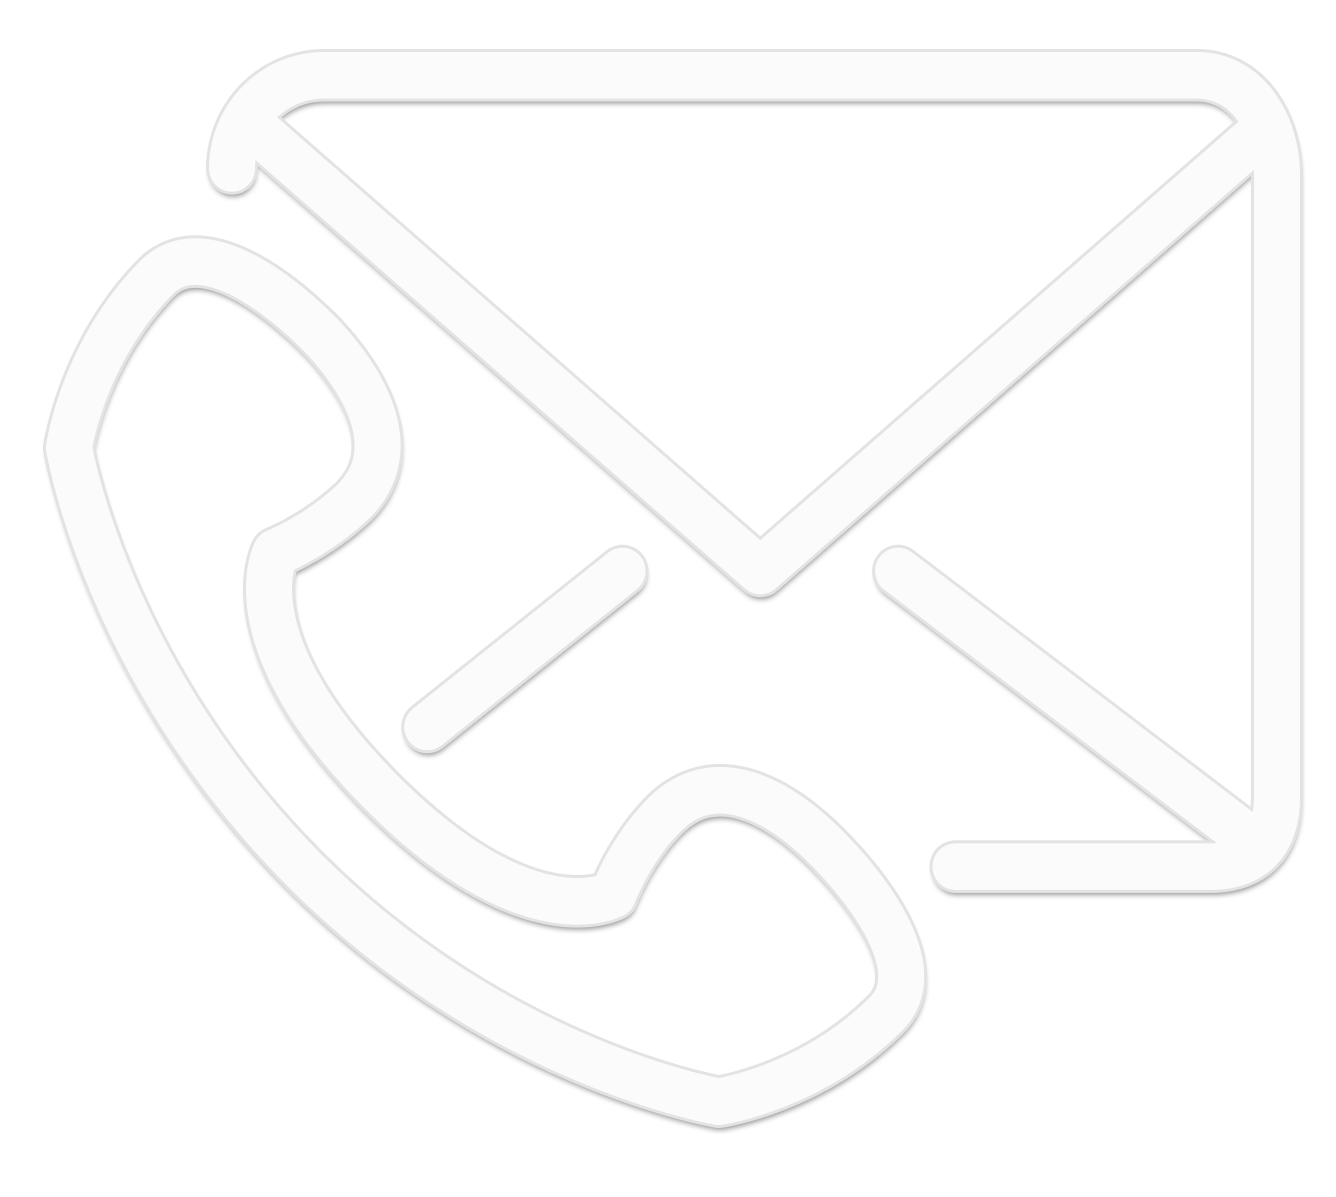 call and email contact icon